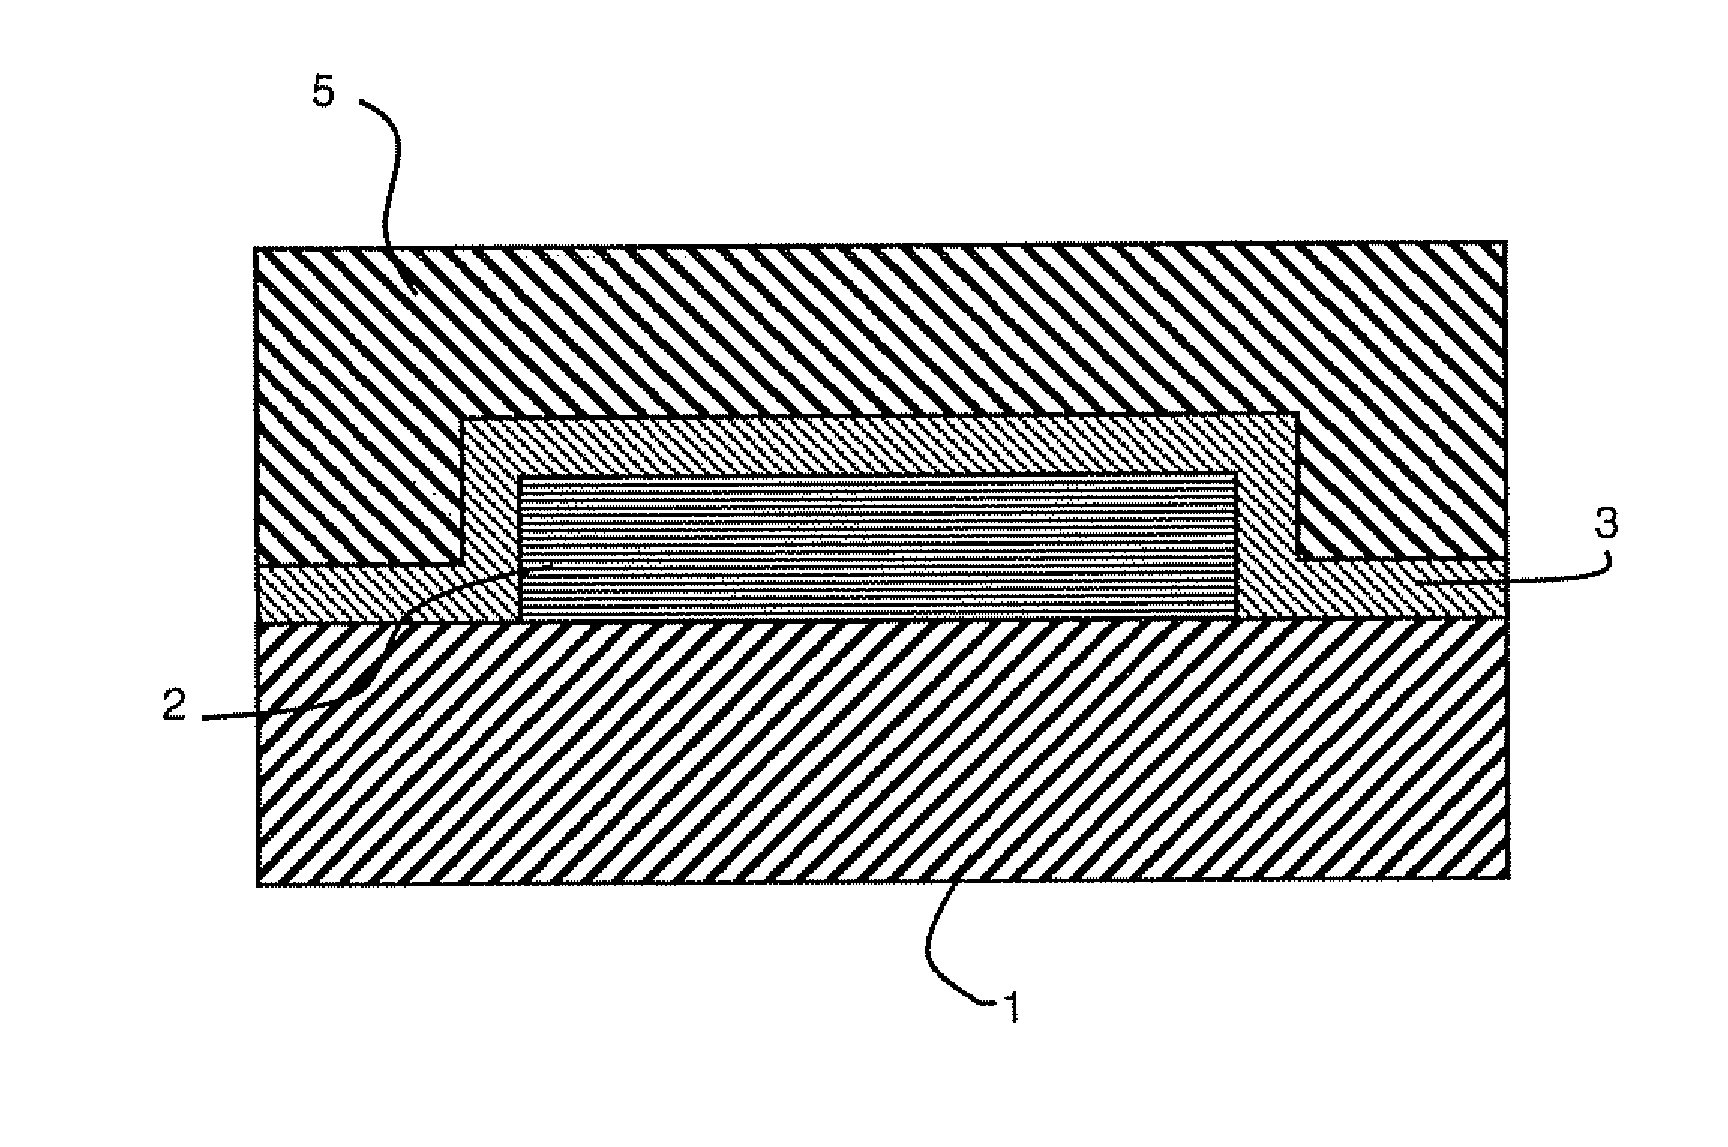 Flexible packaging device of a microbattery